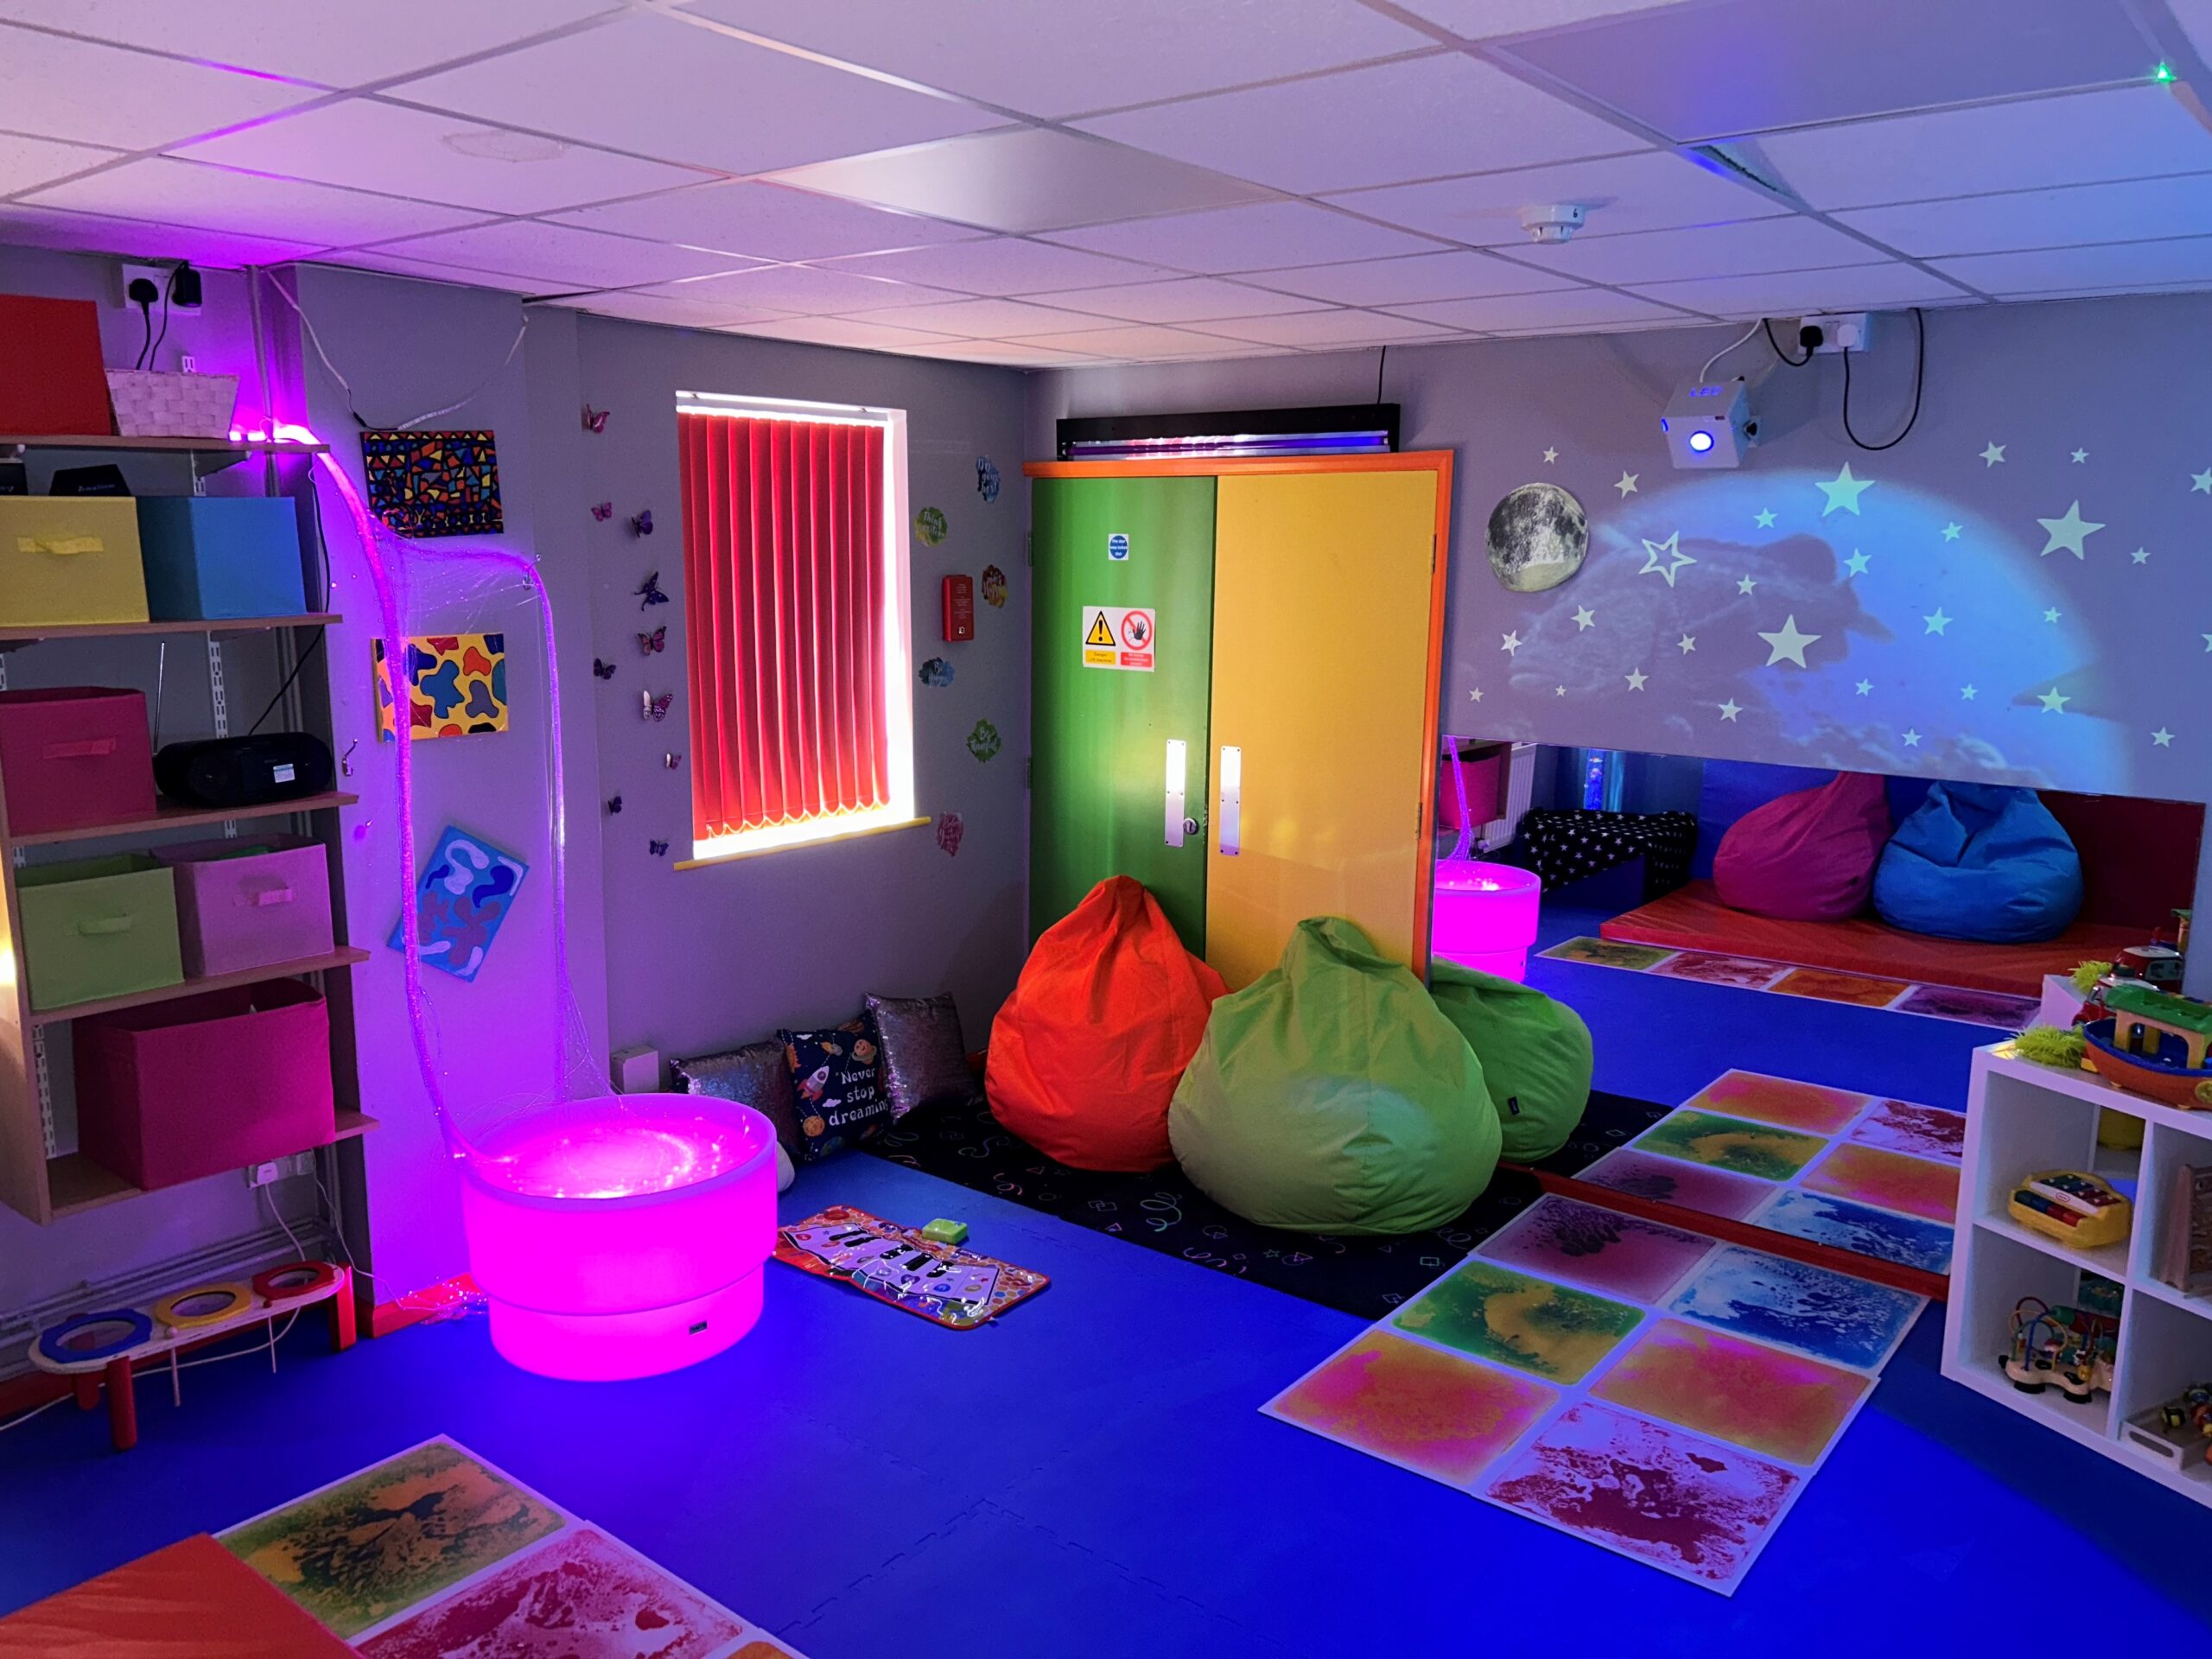 What should be in a sensory room for autism?